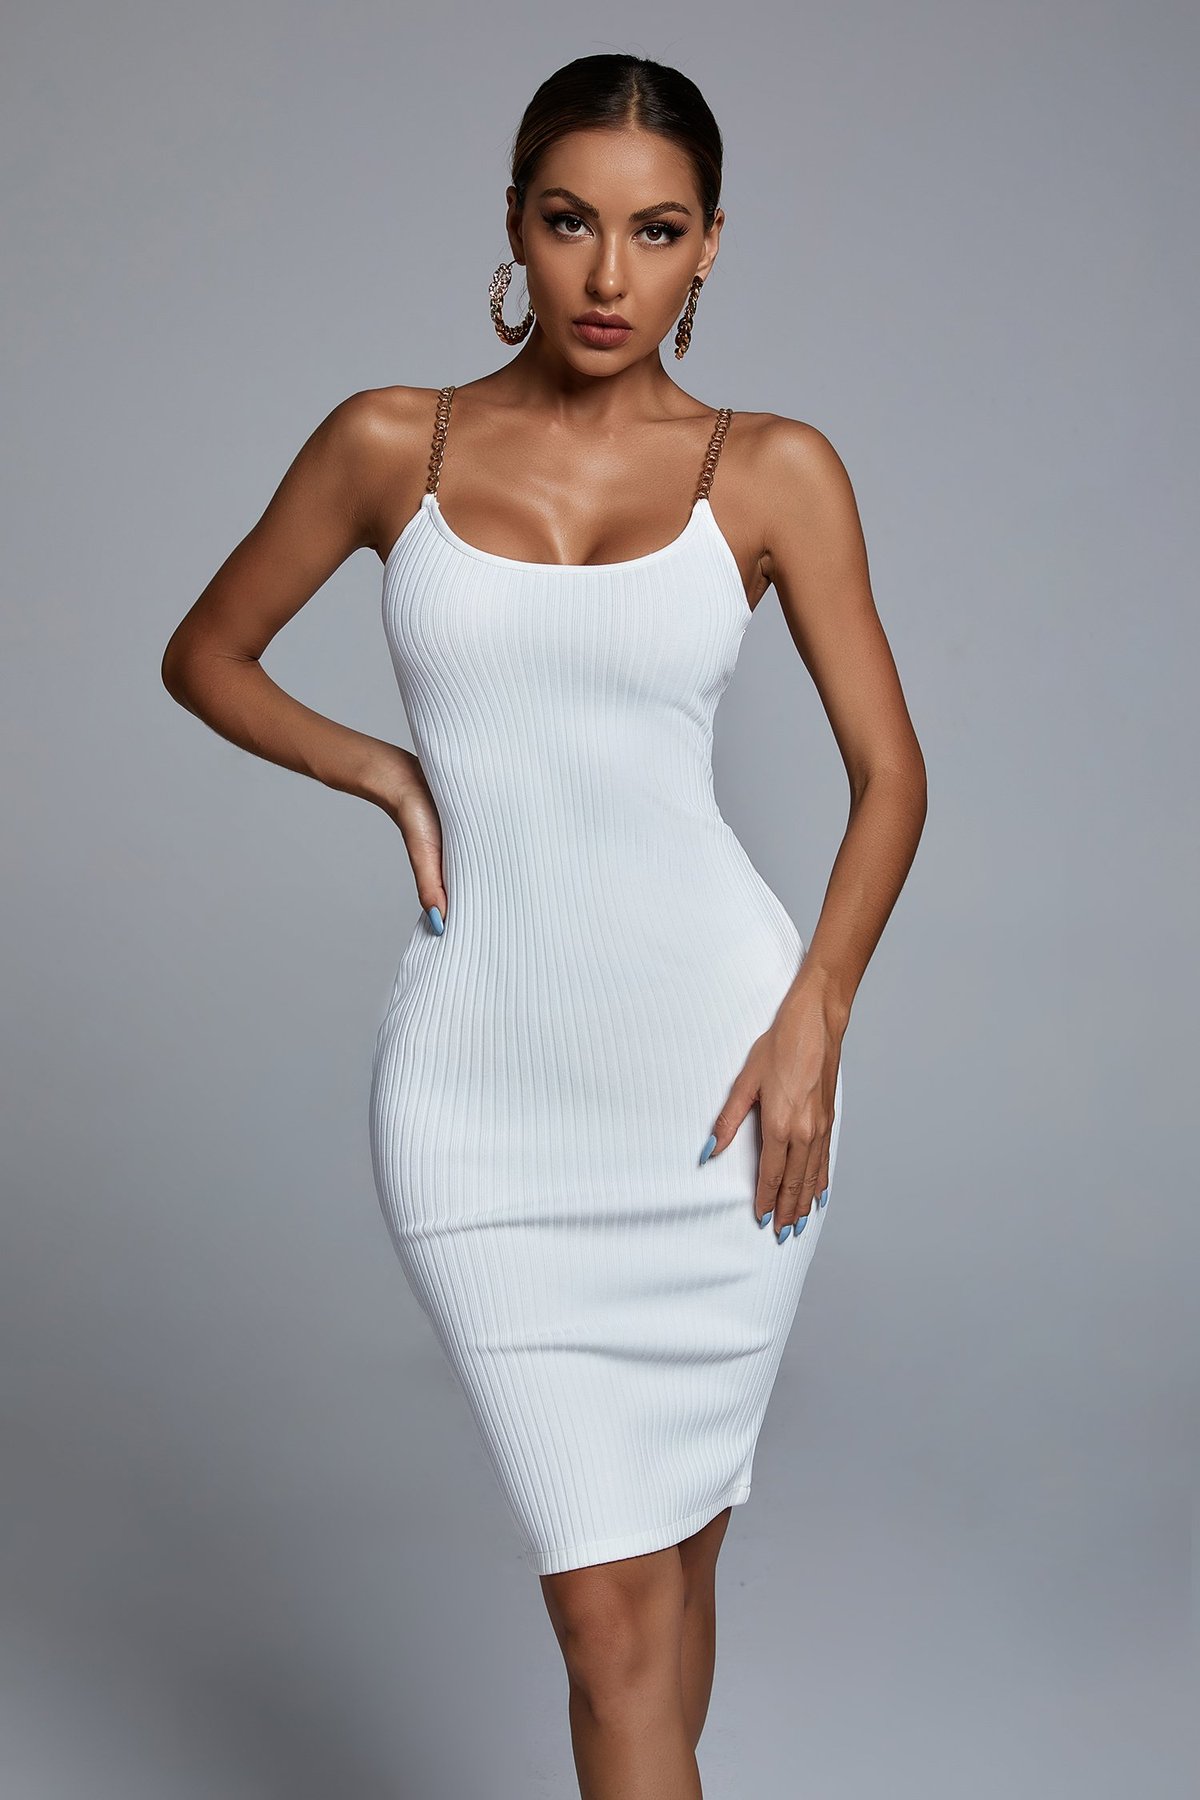 what is a bodycon dress